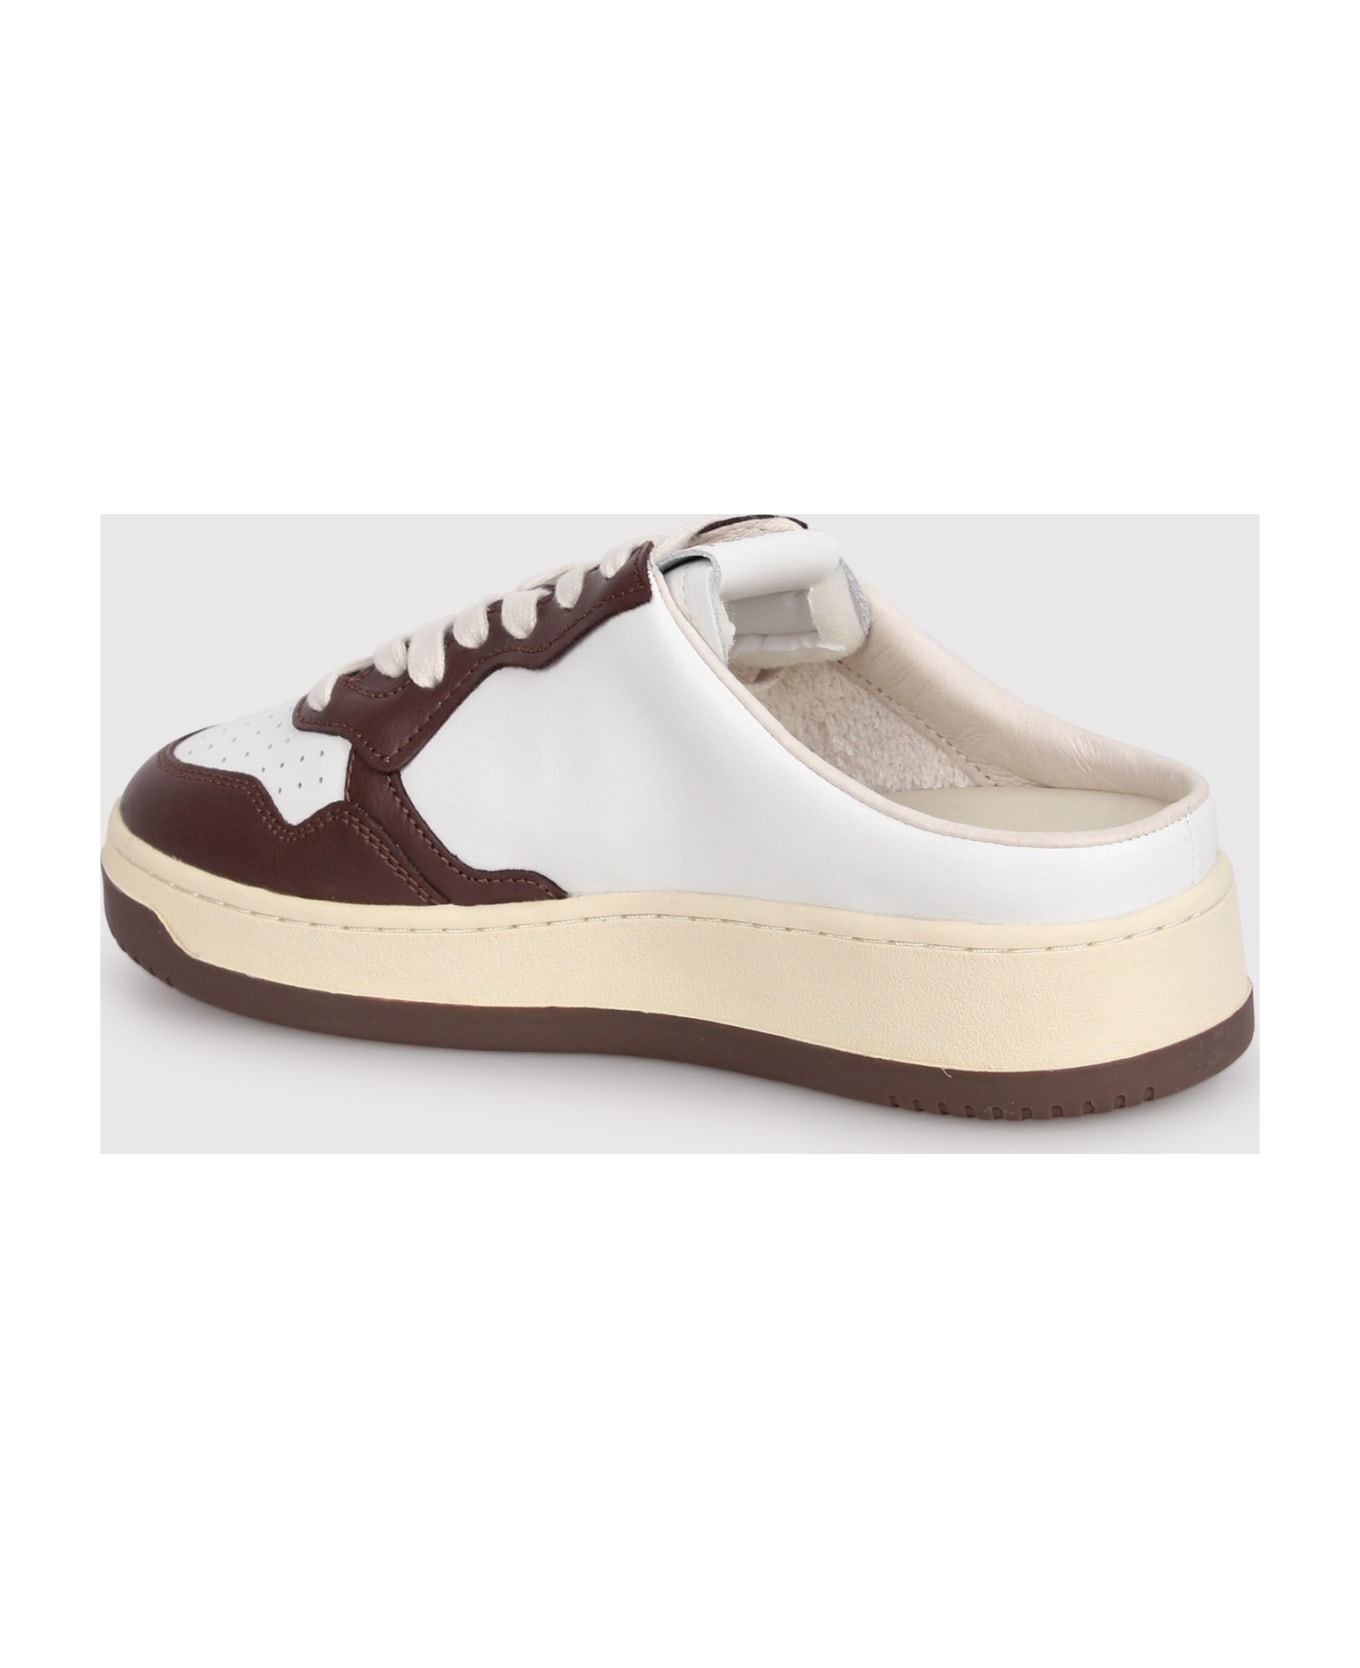 Autry Medalist Mule Low Sneakers In White And Beige Leather スニーカー